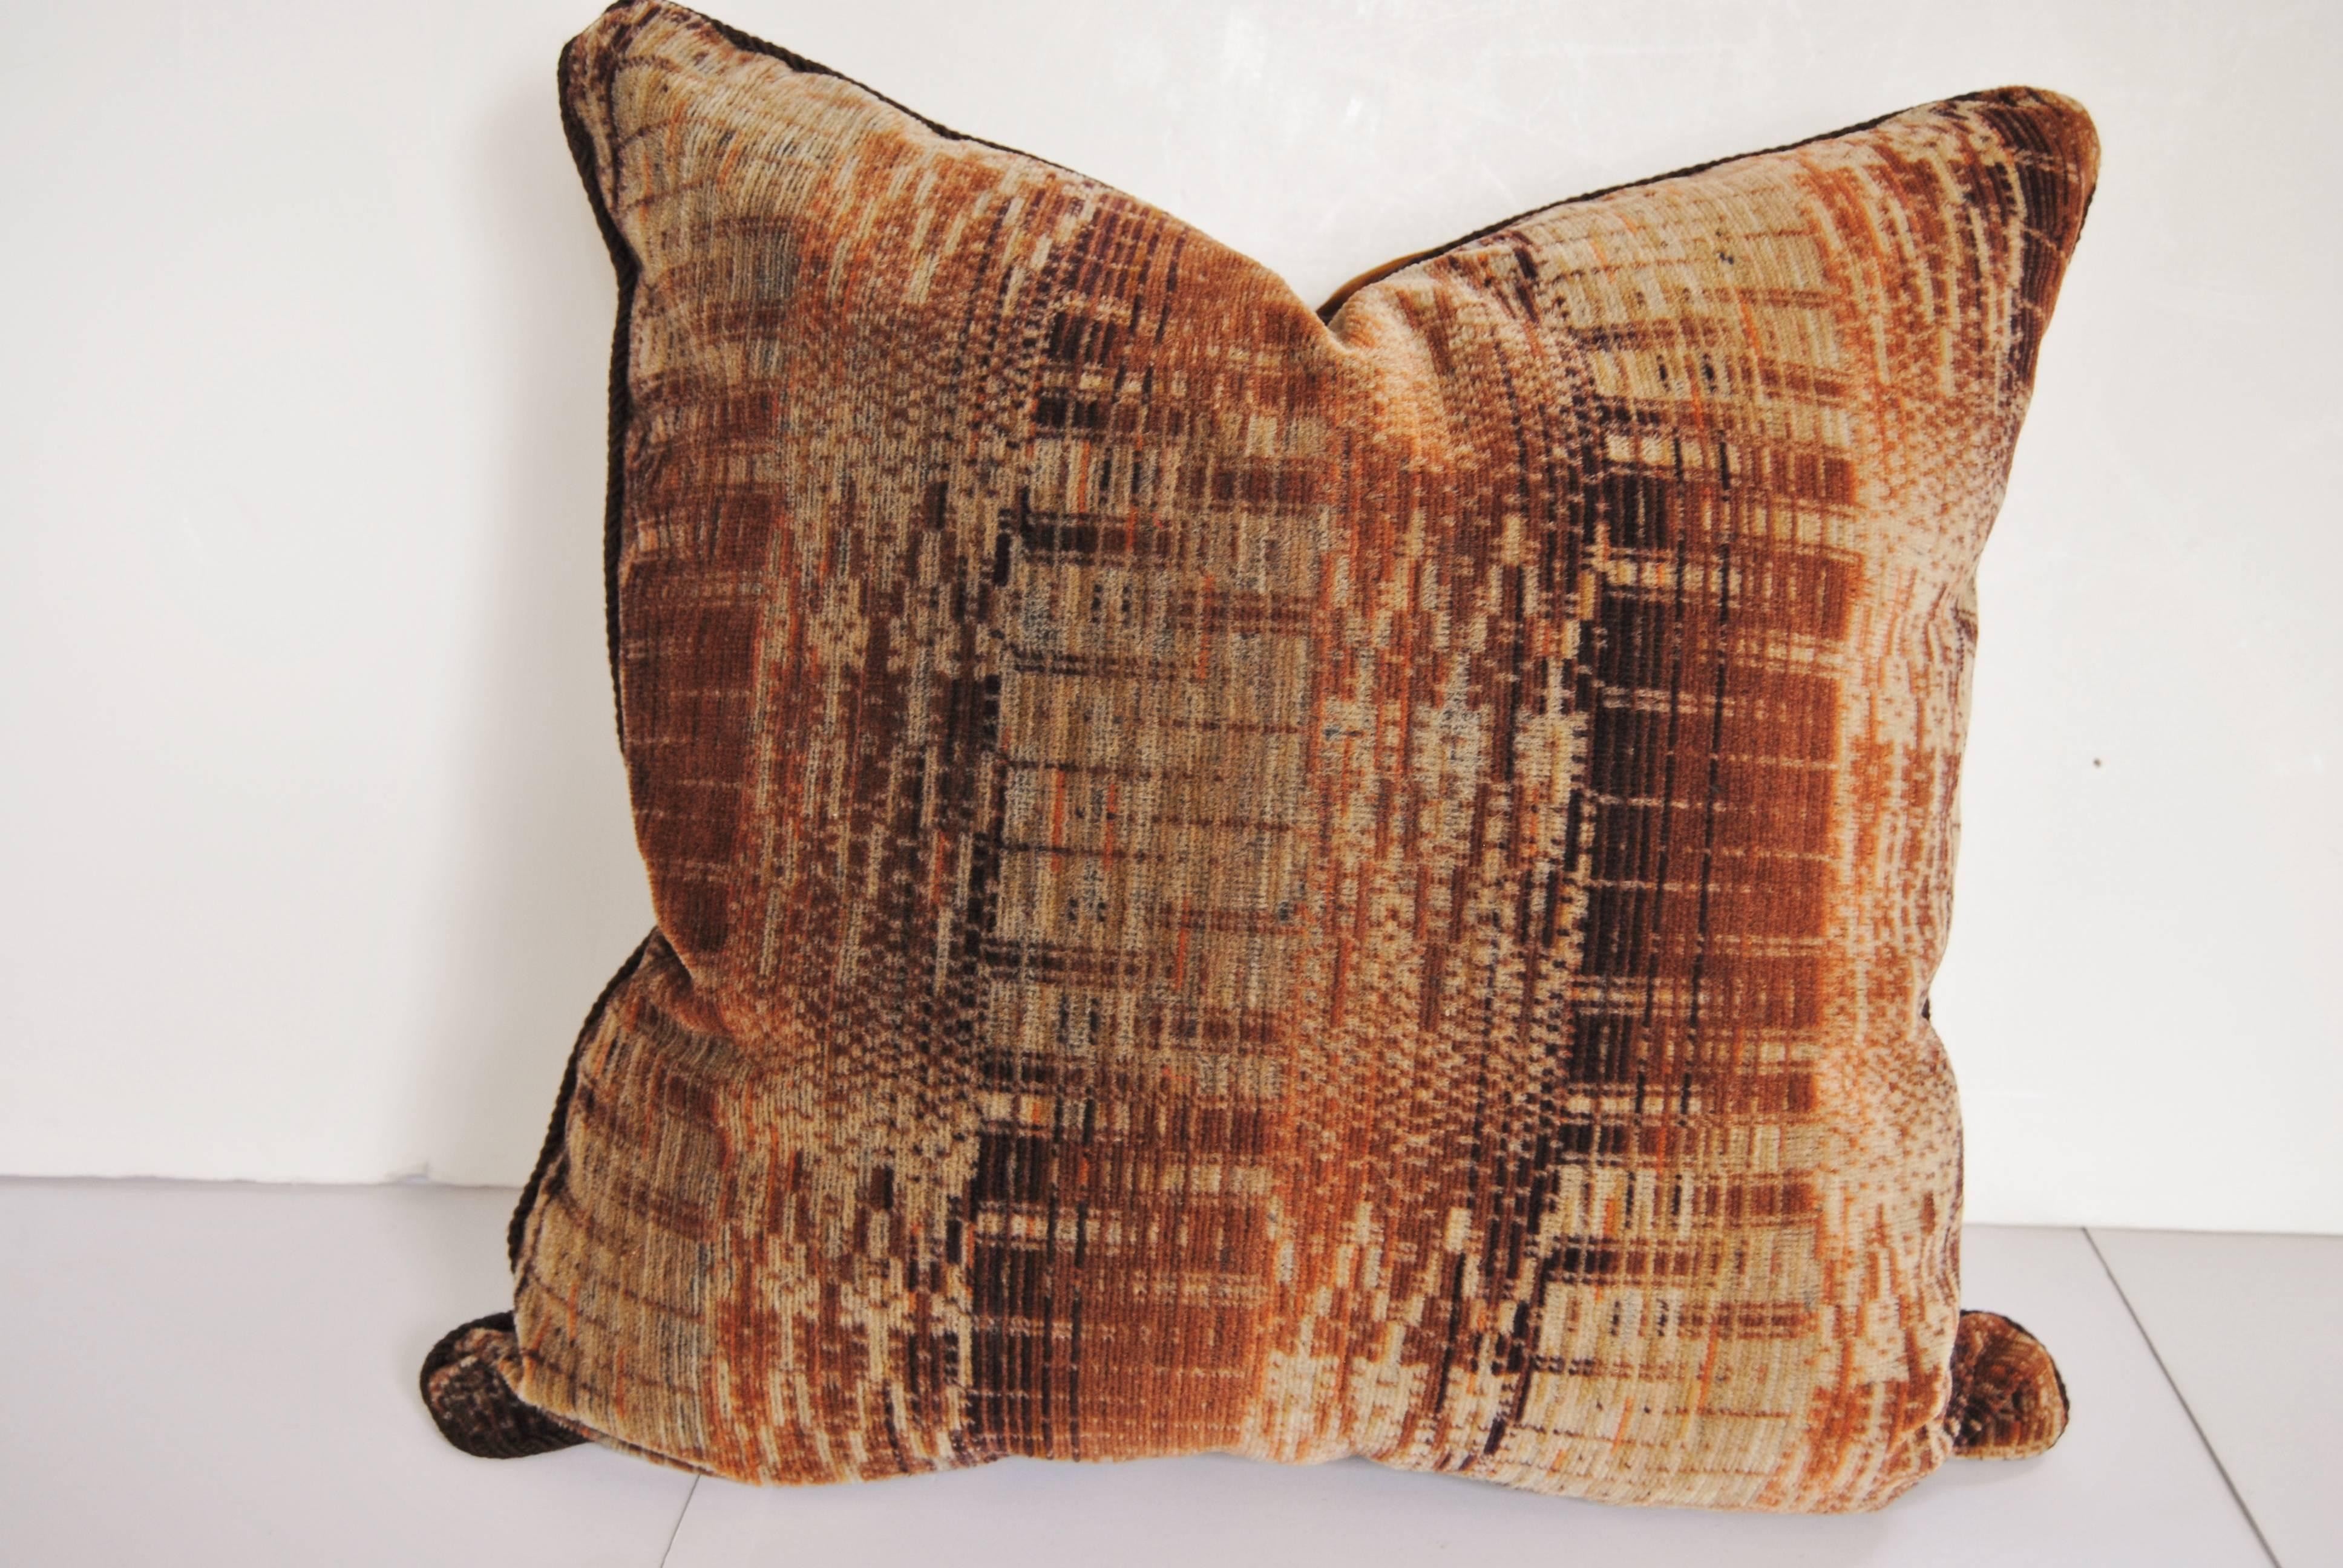 Custom pillow cut from a hand blocked mohair textile from the Amsterdam School period, 1915 - 1927. Pillow is corded, backed in a chocolate velvet, filled with an insert of 50/50 down and feathers and hand-sewn closed.